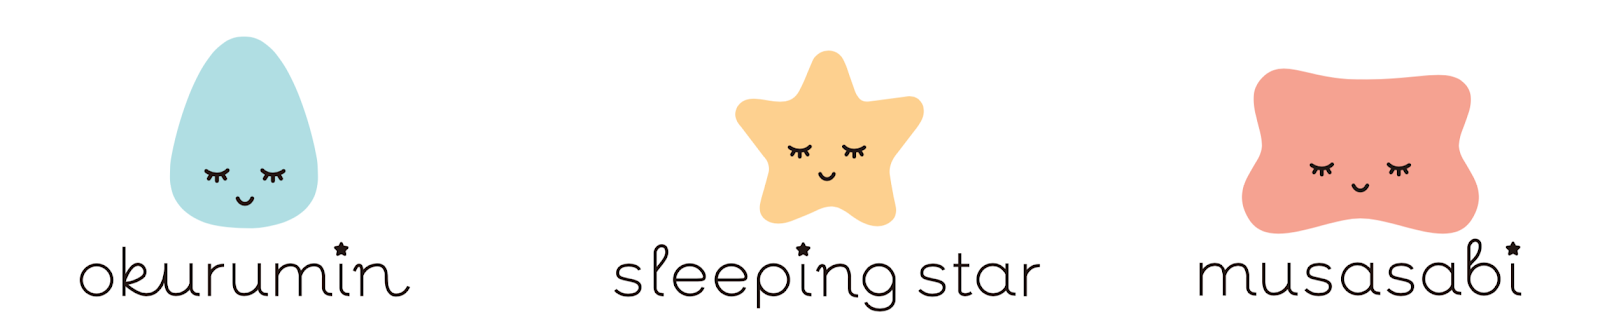 Humble Bunny case study for Sleeping Baby Japan project e-commerce and brand development custom product logos